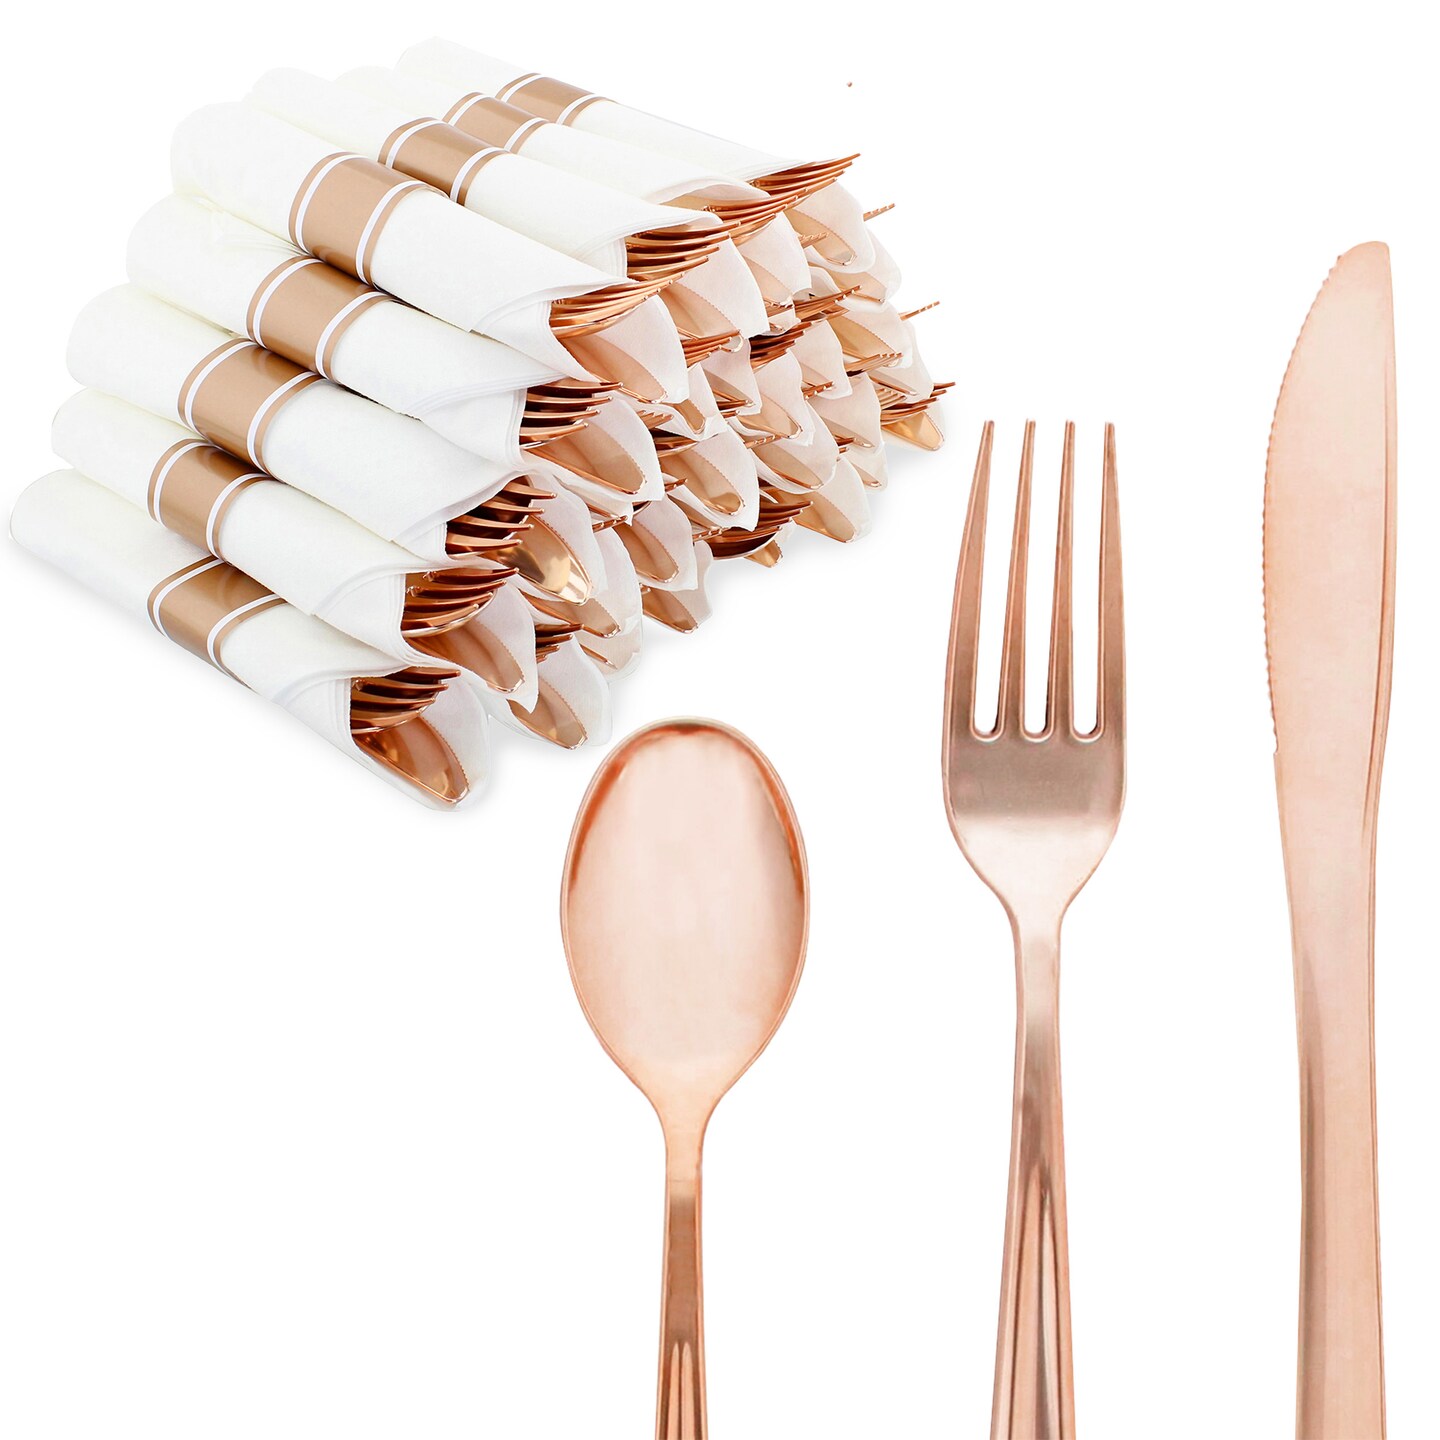 Spec101 Disposable Silverware in Silver Gold or Rose Gold Set of 30 to 300 Count